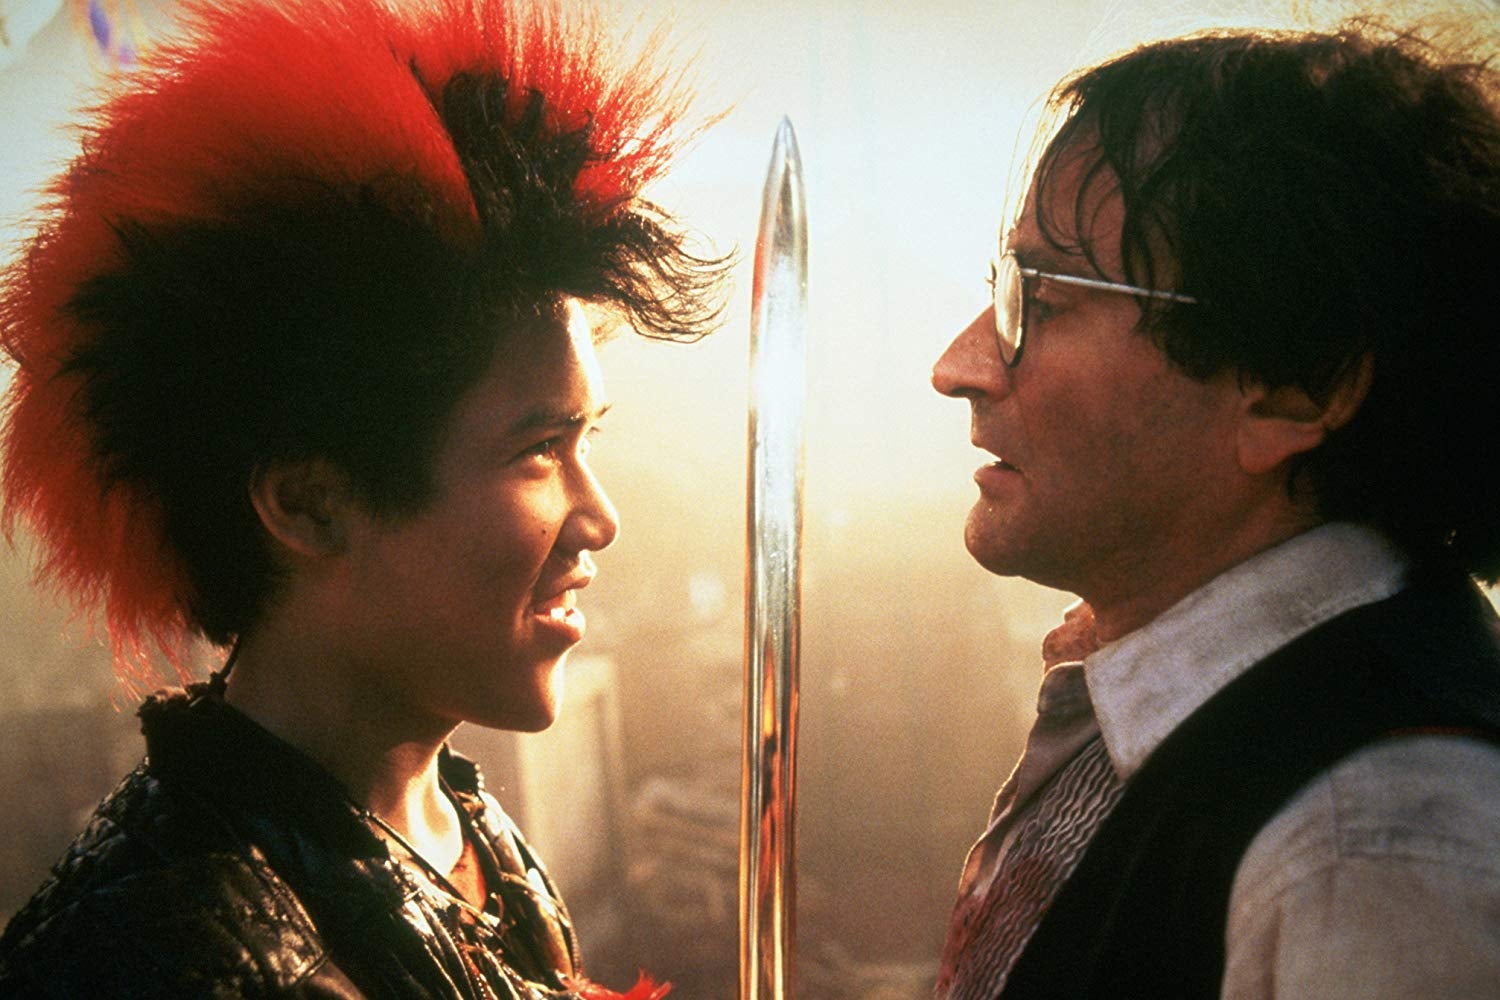 Dante Basco, with a red-tipped mohawk, holds a sword up to a bespectacled Robin Williams.